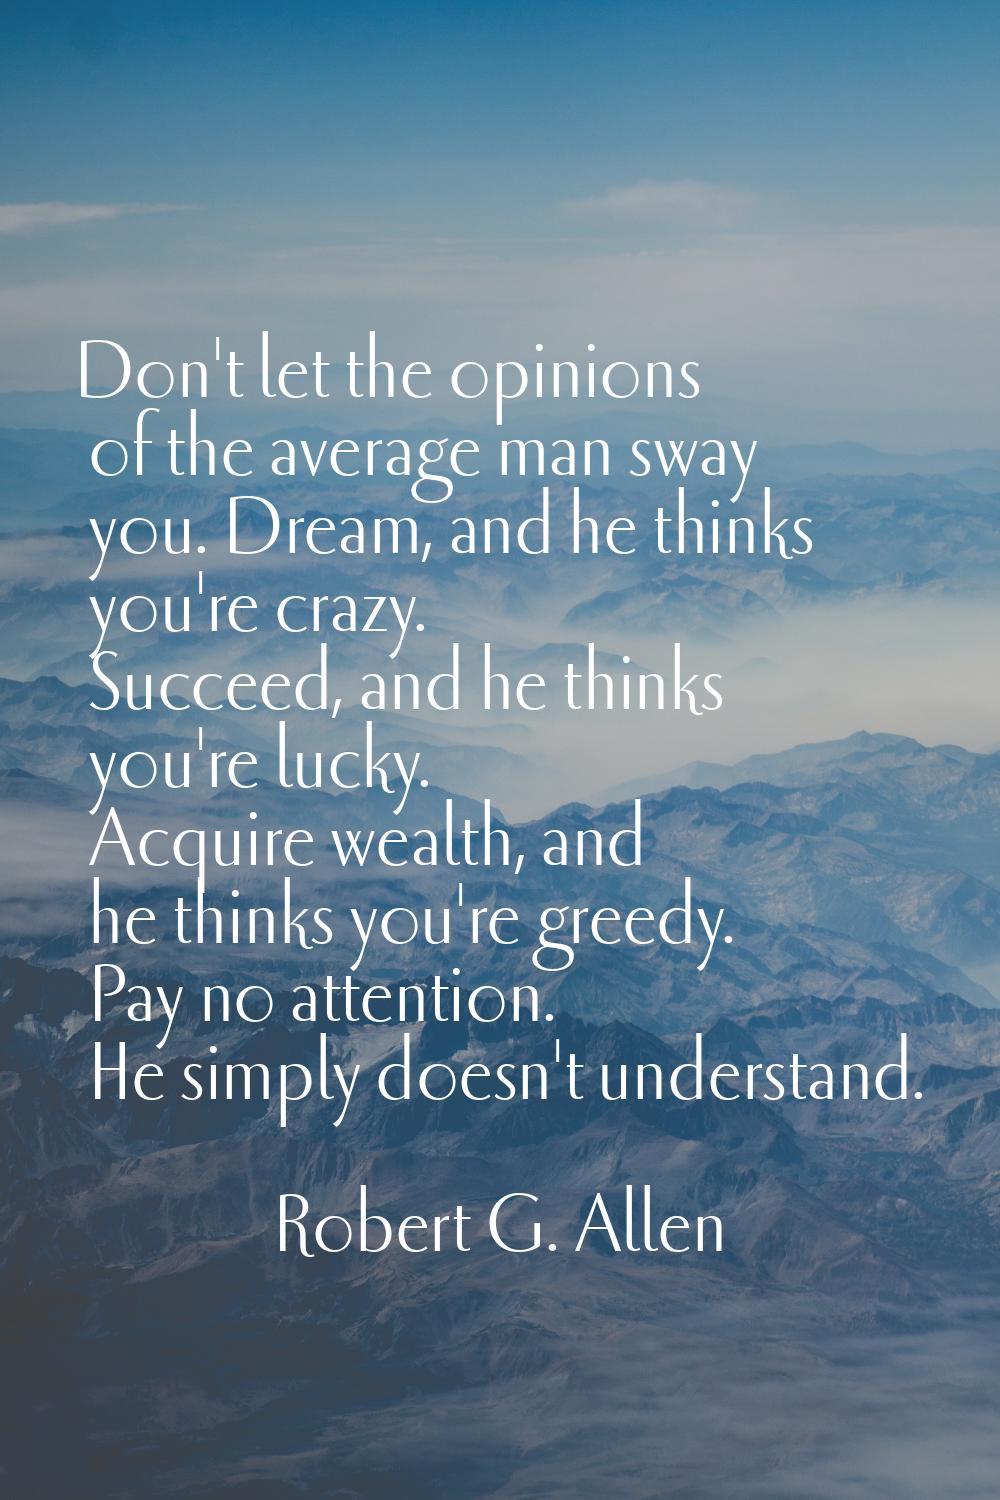 Don't let the opinions of the average man sway you. Dream, and he thinks you're crazy. Succeed, and